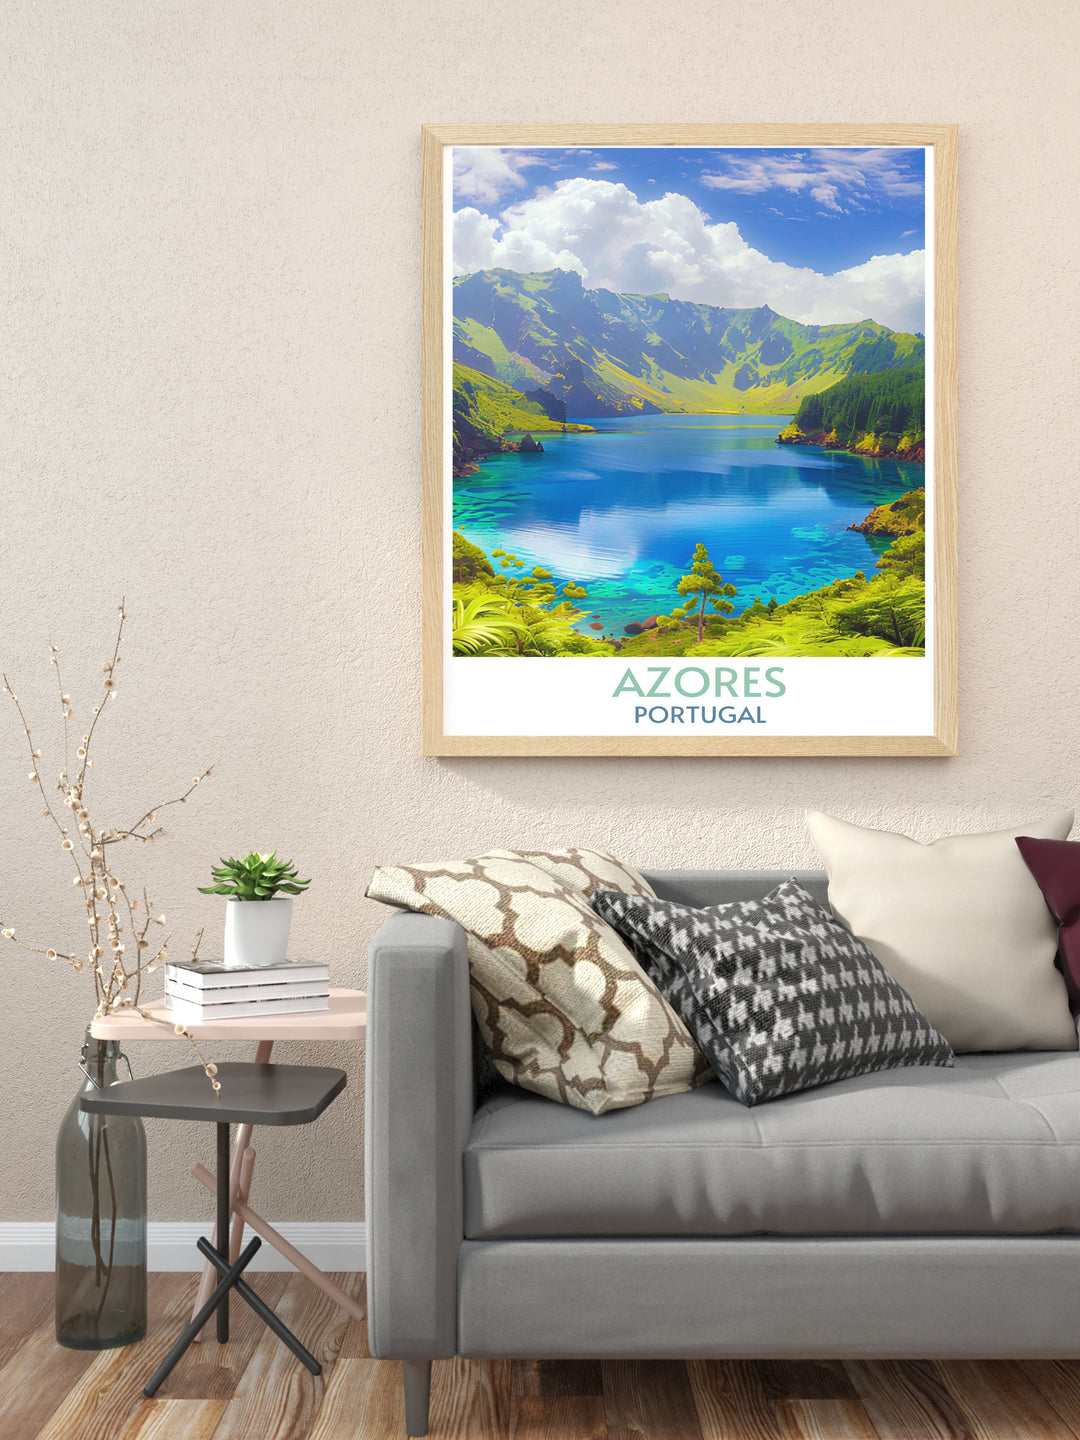 Azores poster featuring Lagoa do Fogo, combining natural beauty with artistic flair, great for collectors and enthusiasts.